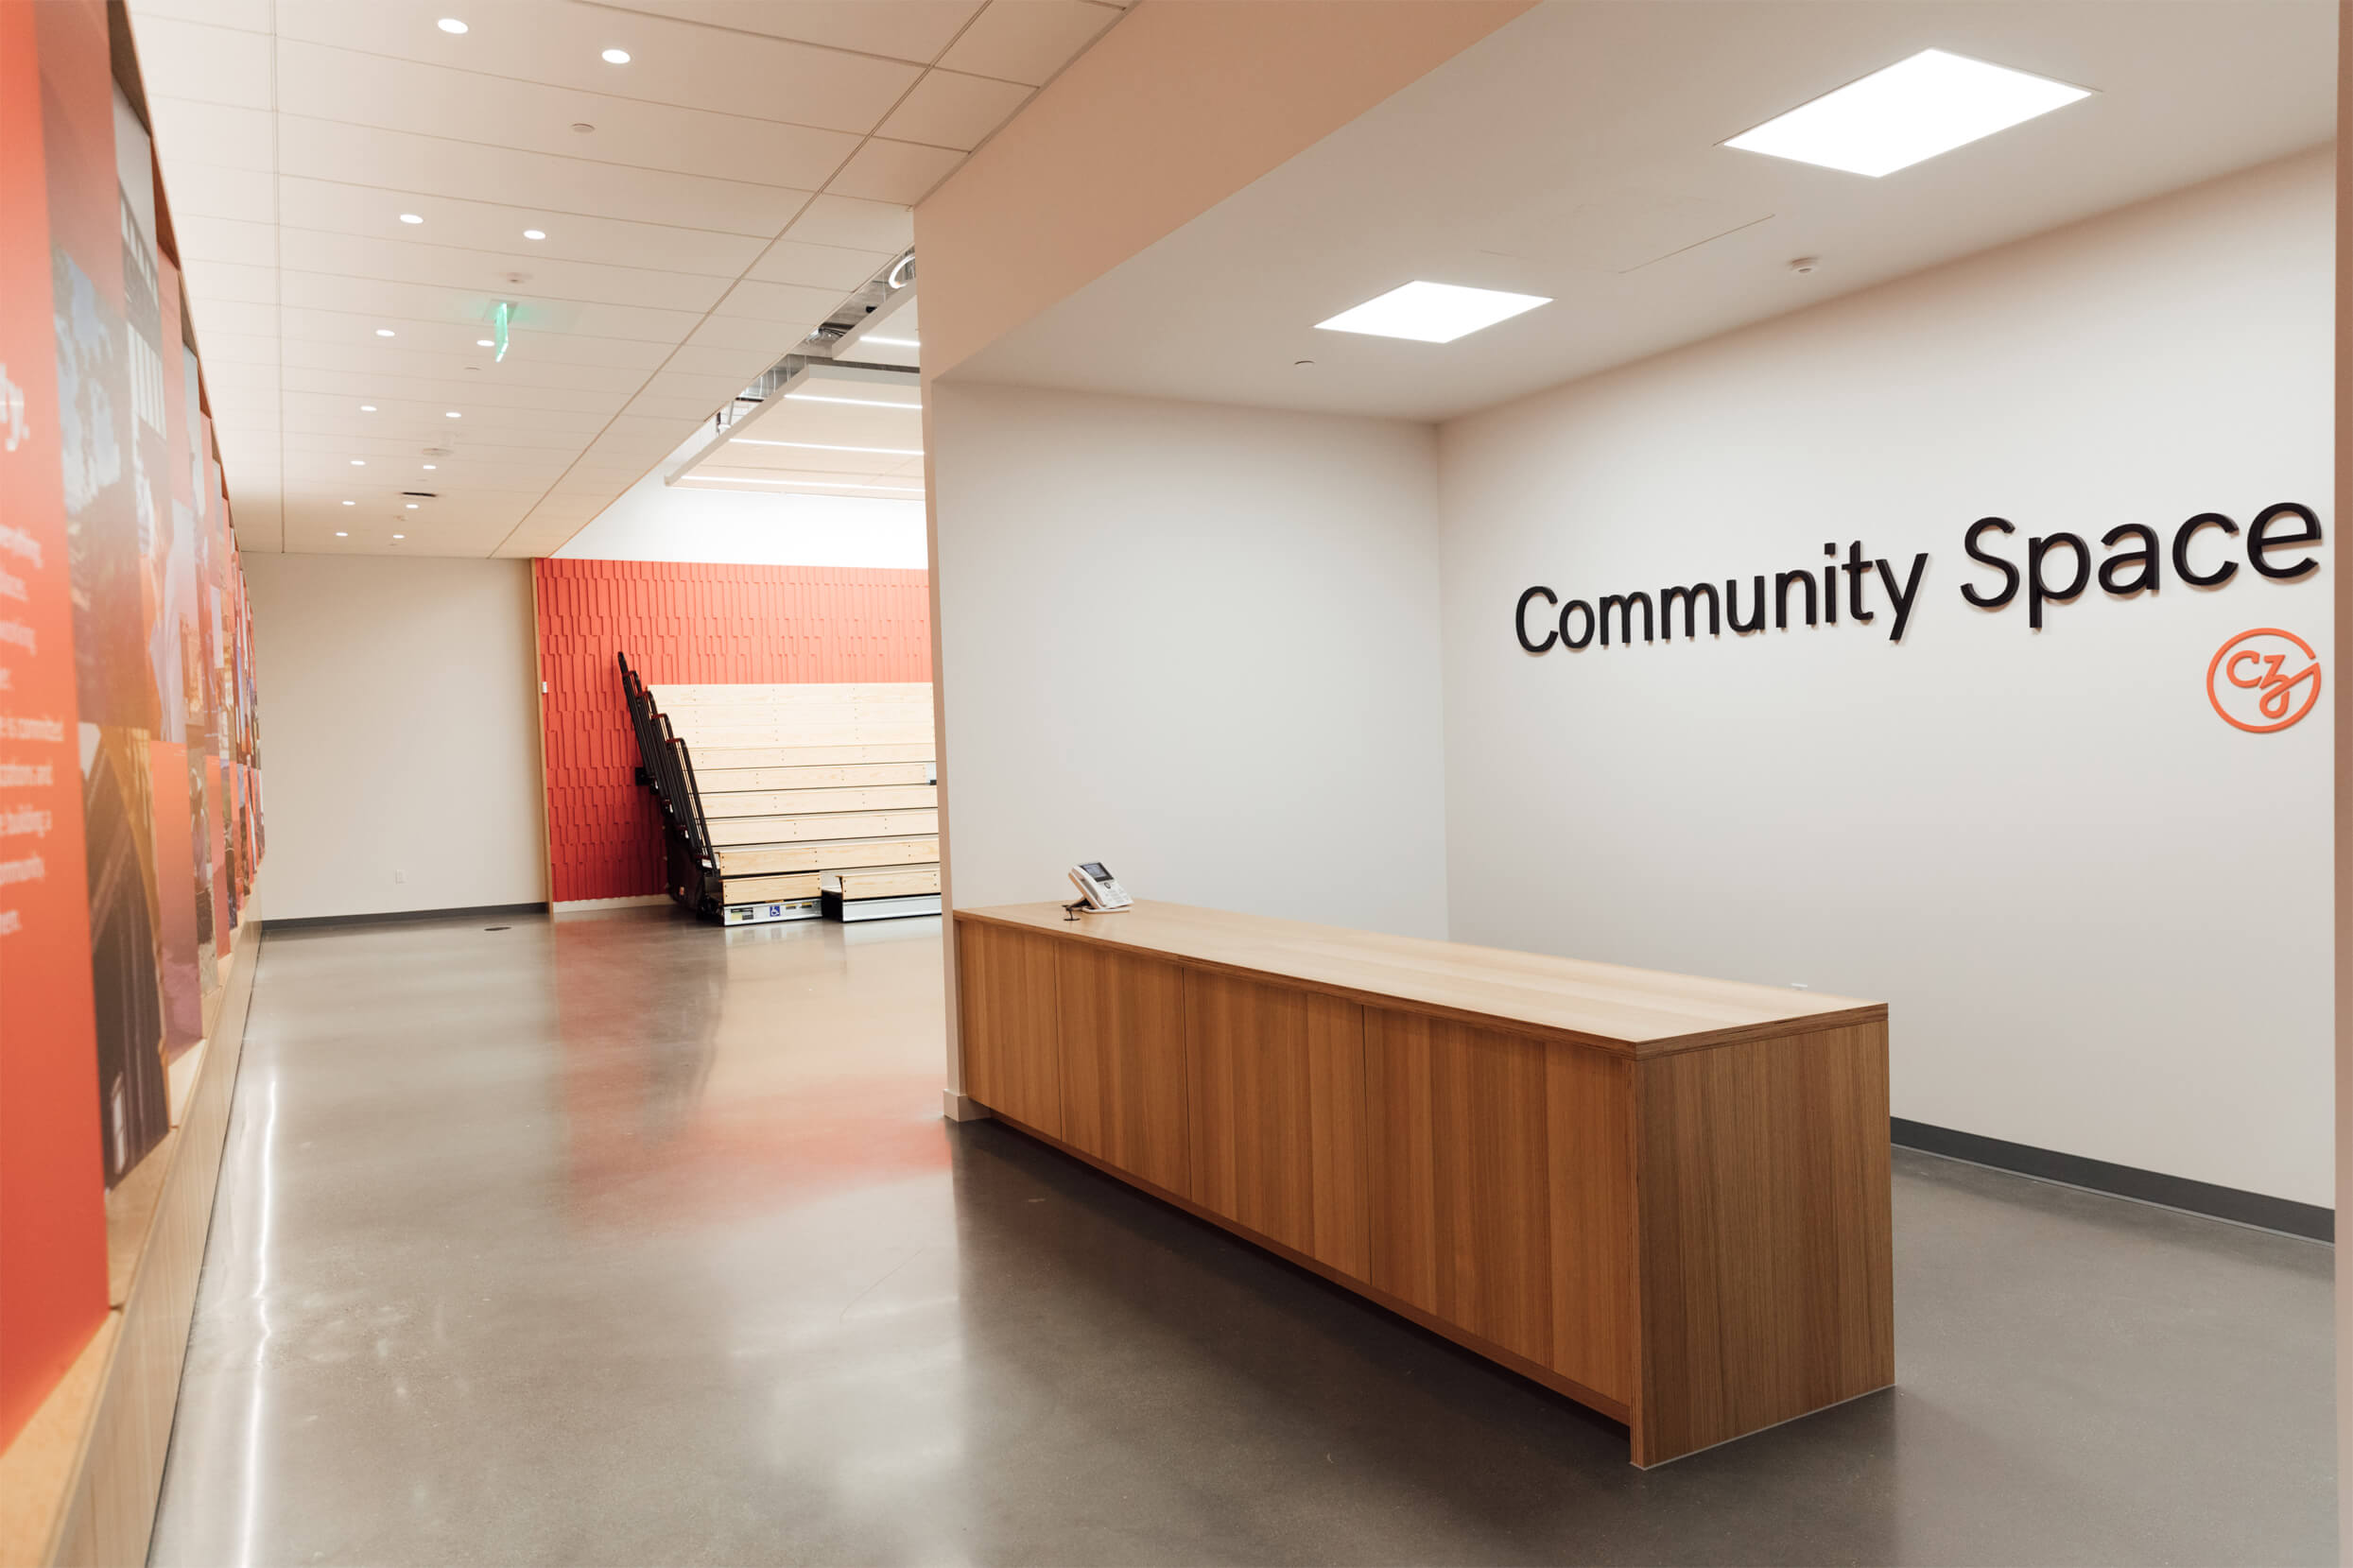 Photo of CZI Community Space main event space entryway, showing long counter, telephone, and a wall with the words "Community Space" and the circular red "cz" logo at right.